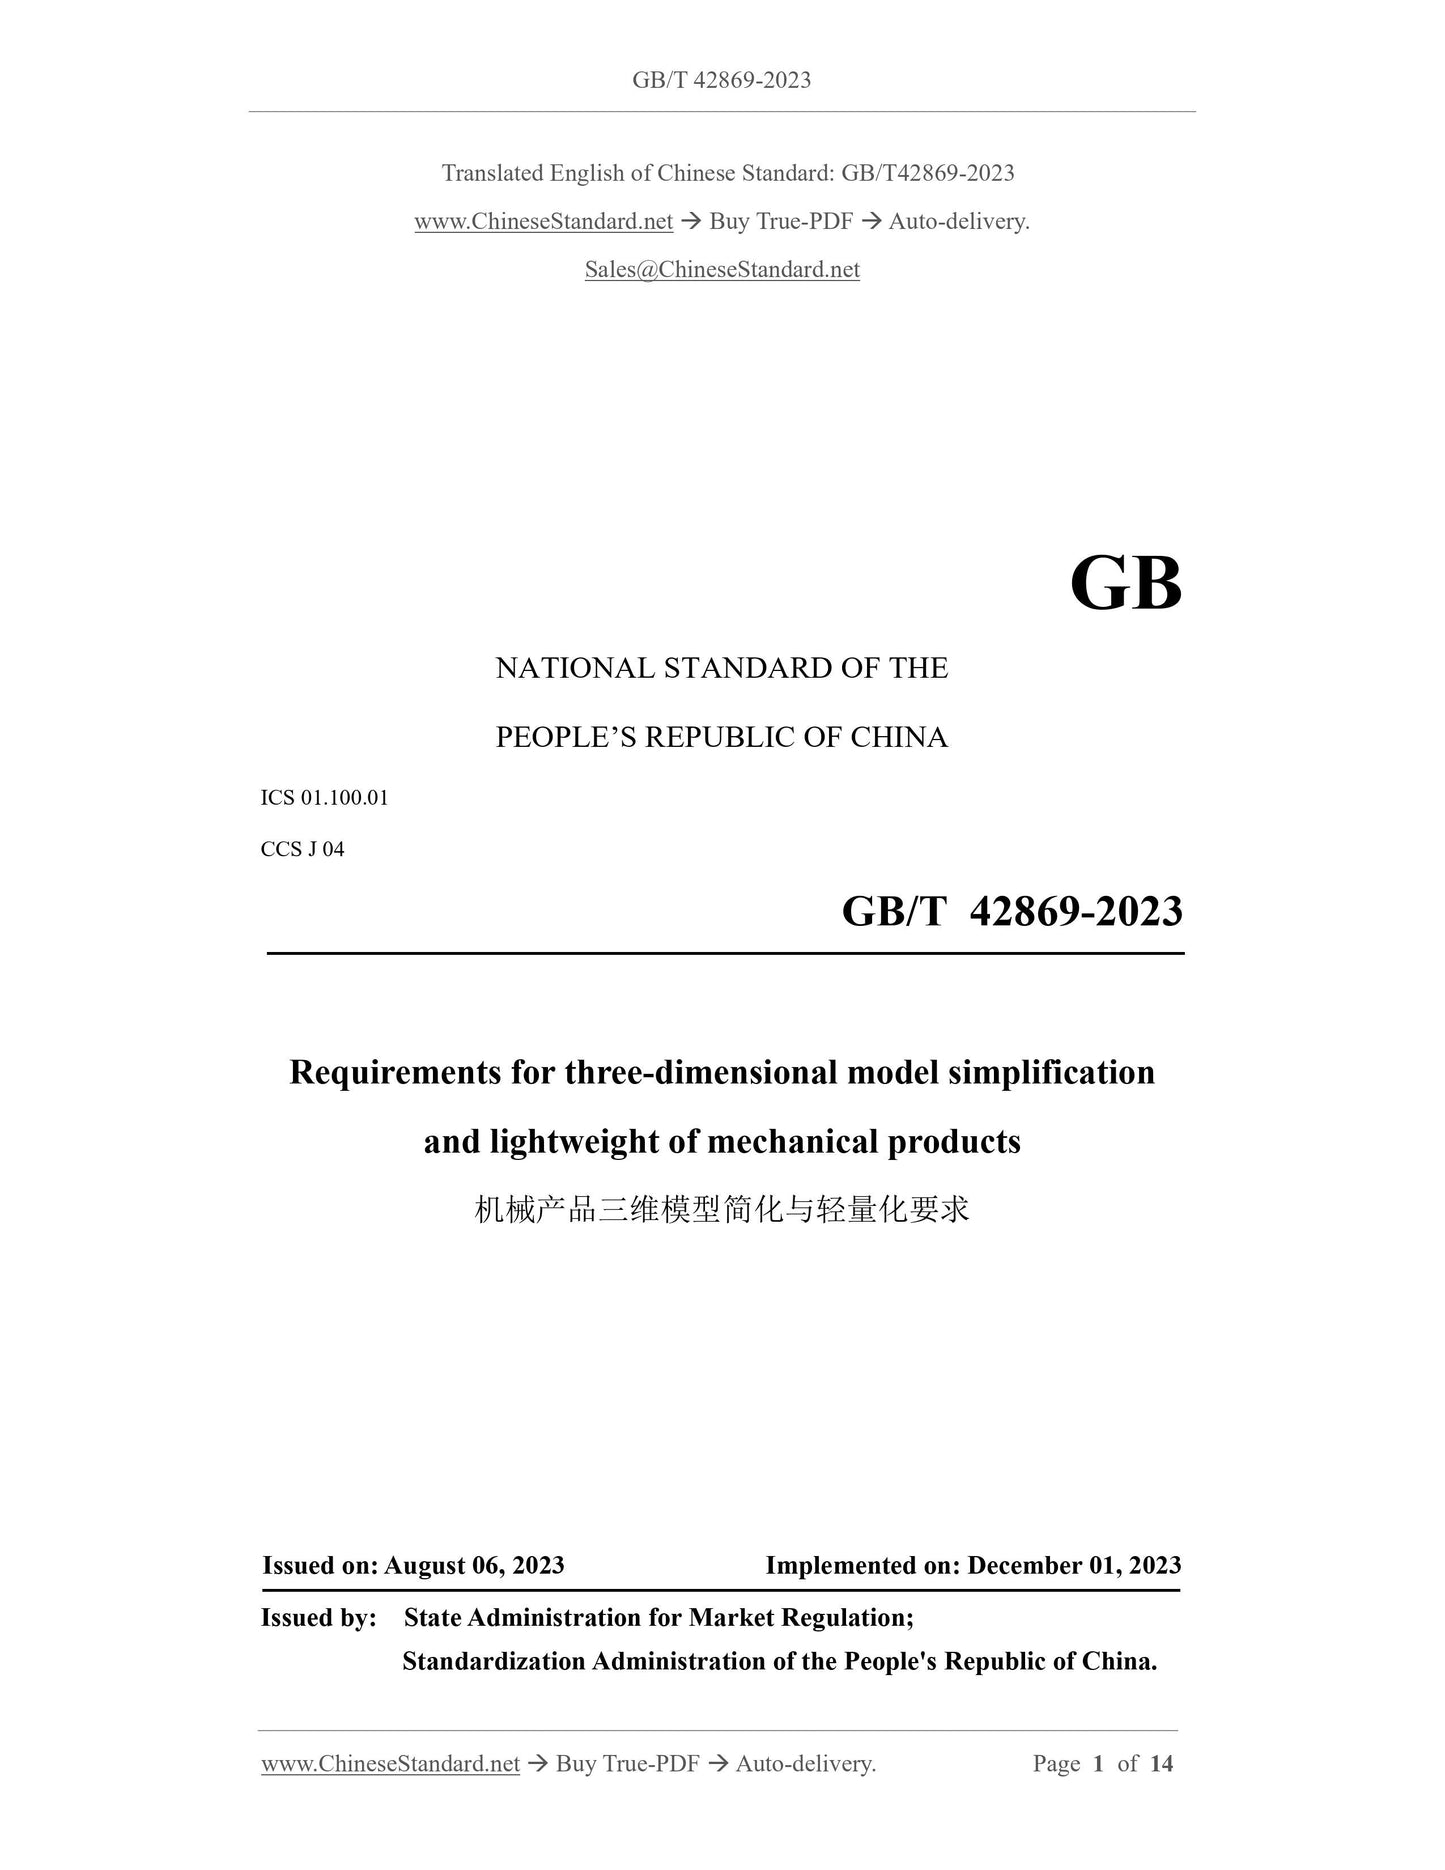 GB/T 42869-2023 Page 1